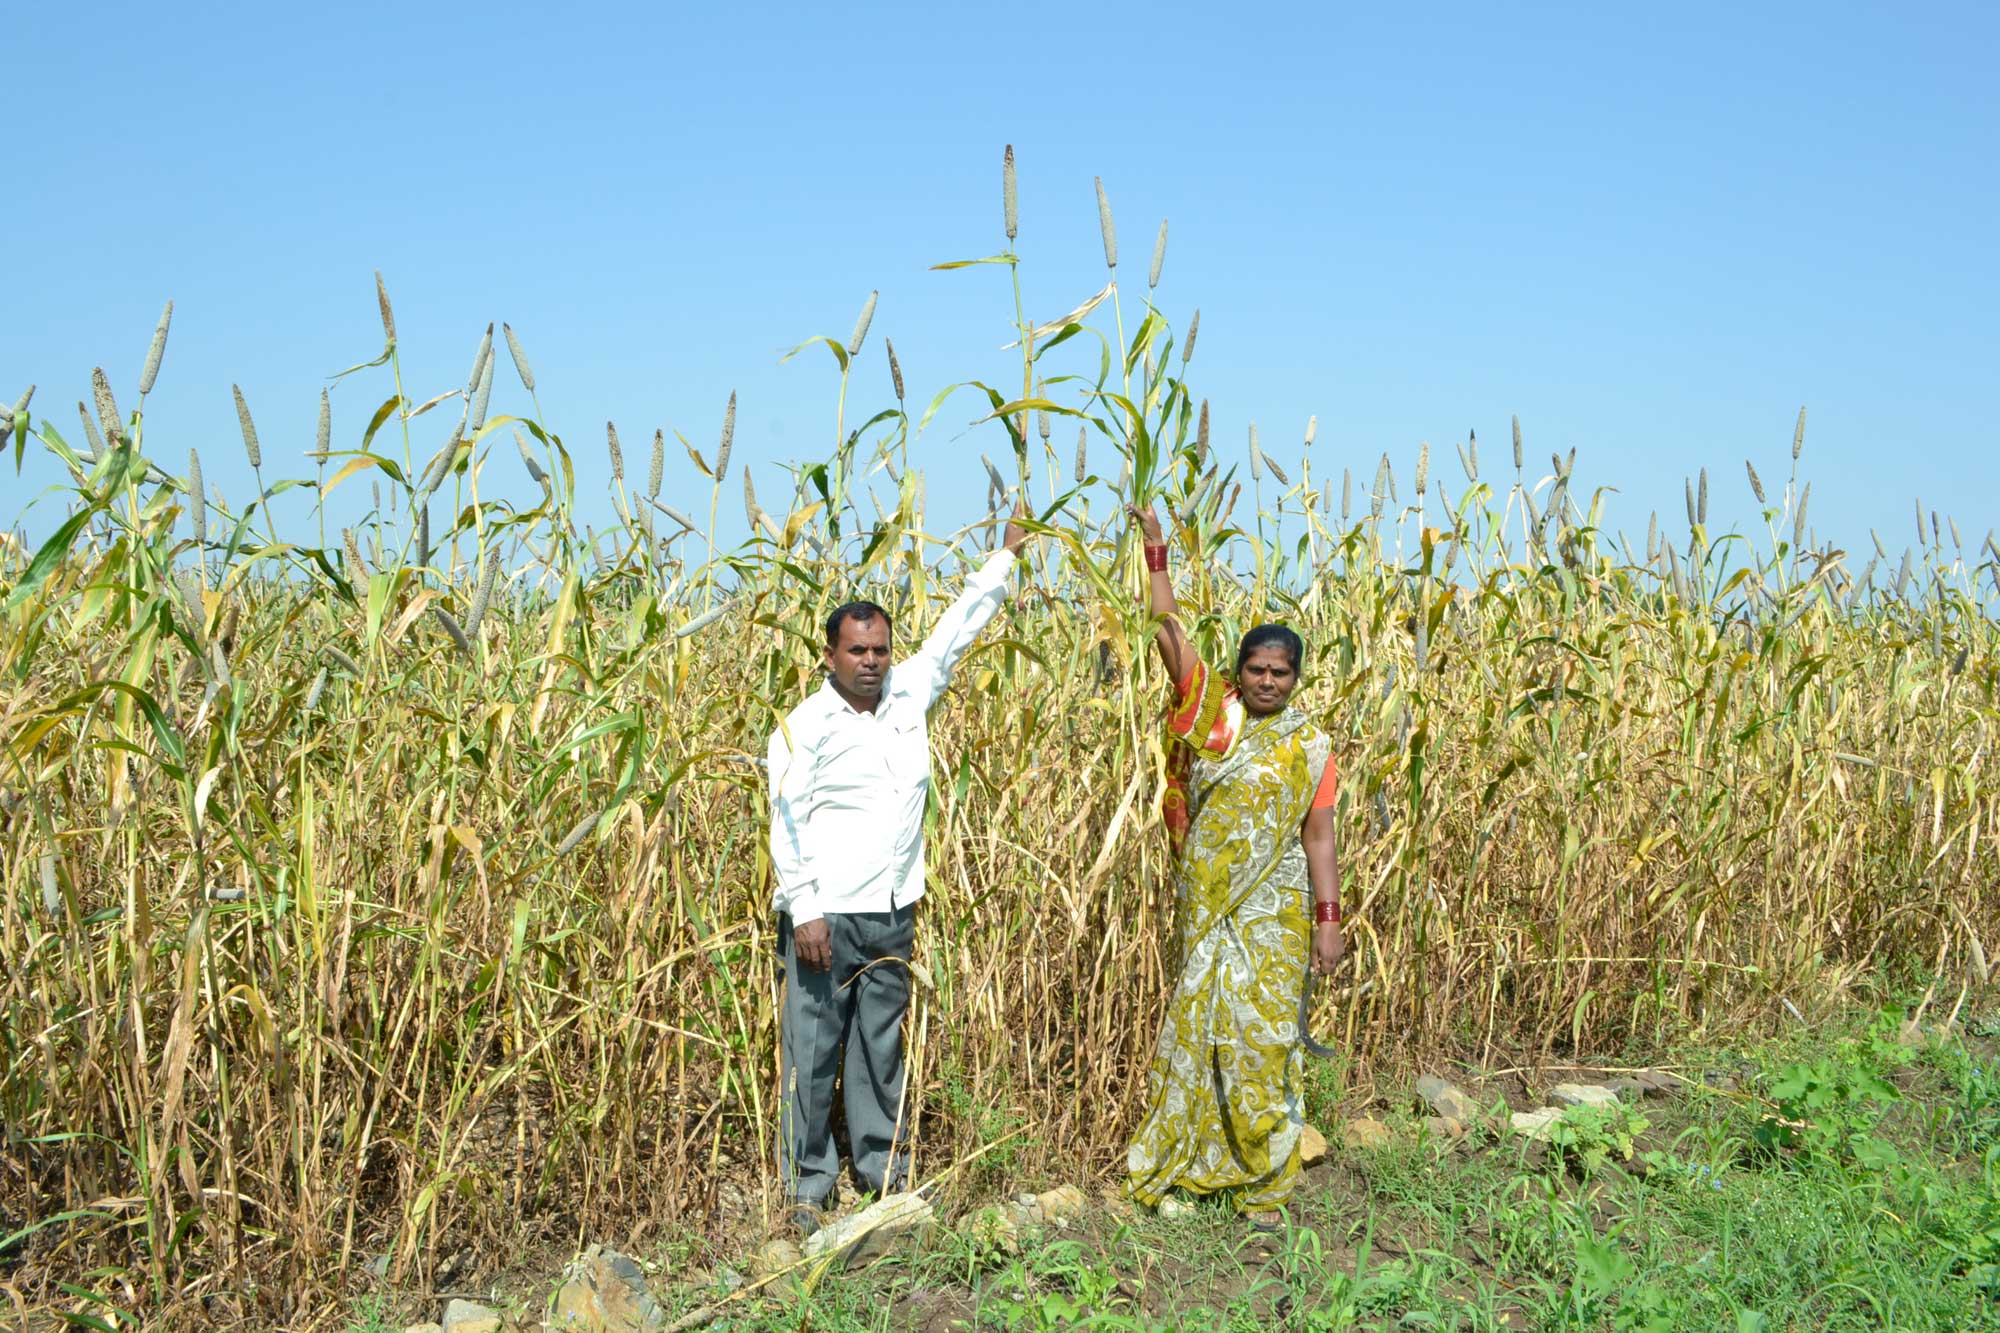 Photograph of two people, a man and a woman, standing at the edge of a cultivated field of pearl millet. The man is wearing a white shirt and gray pants, the woman is wearing a green sari with pink shirt underneath. Both people have one arm raised near a millet plant, showing that the plants are taller.